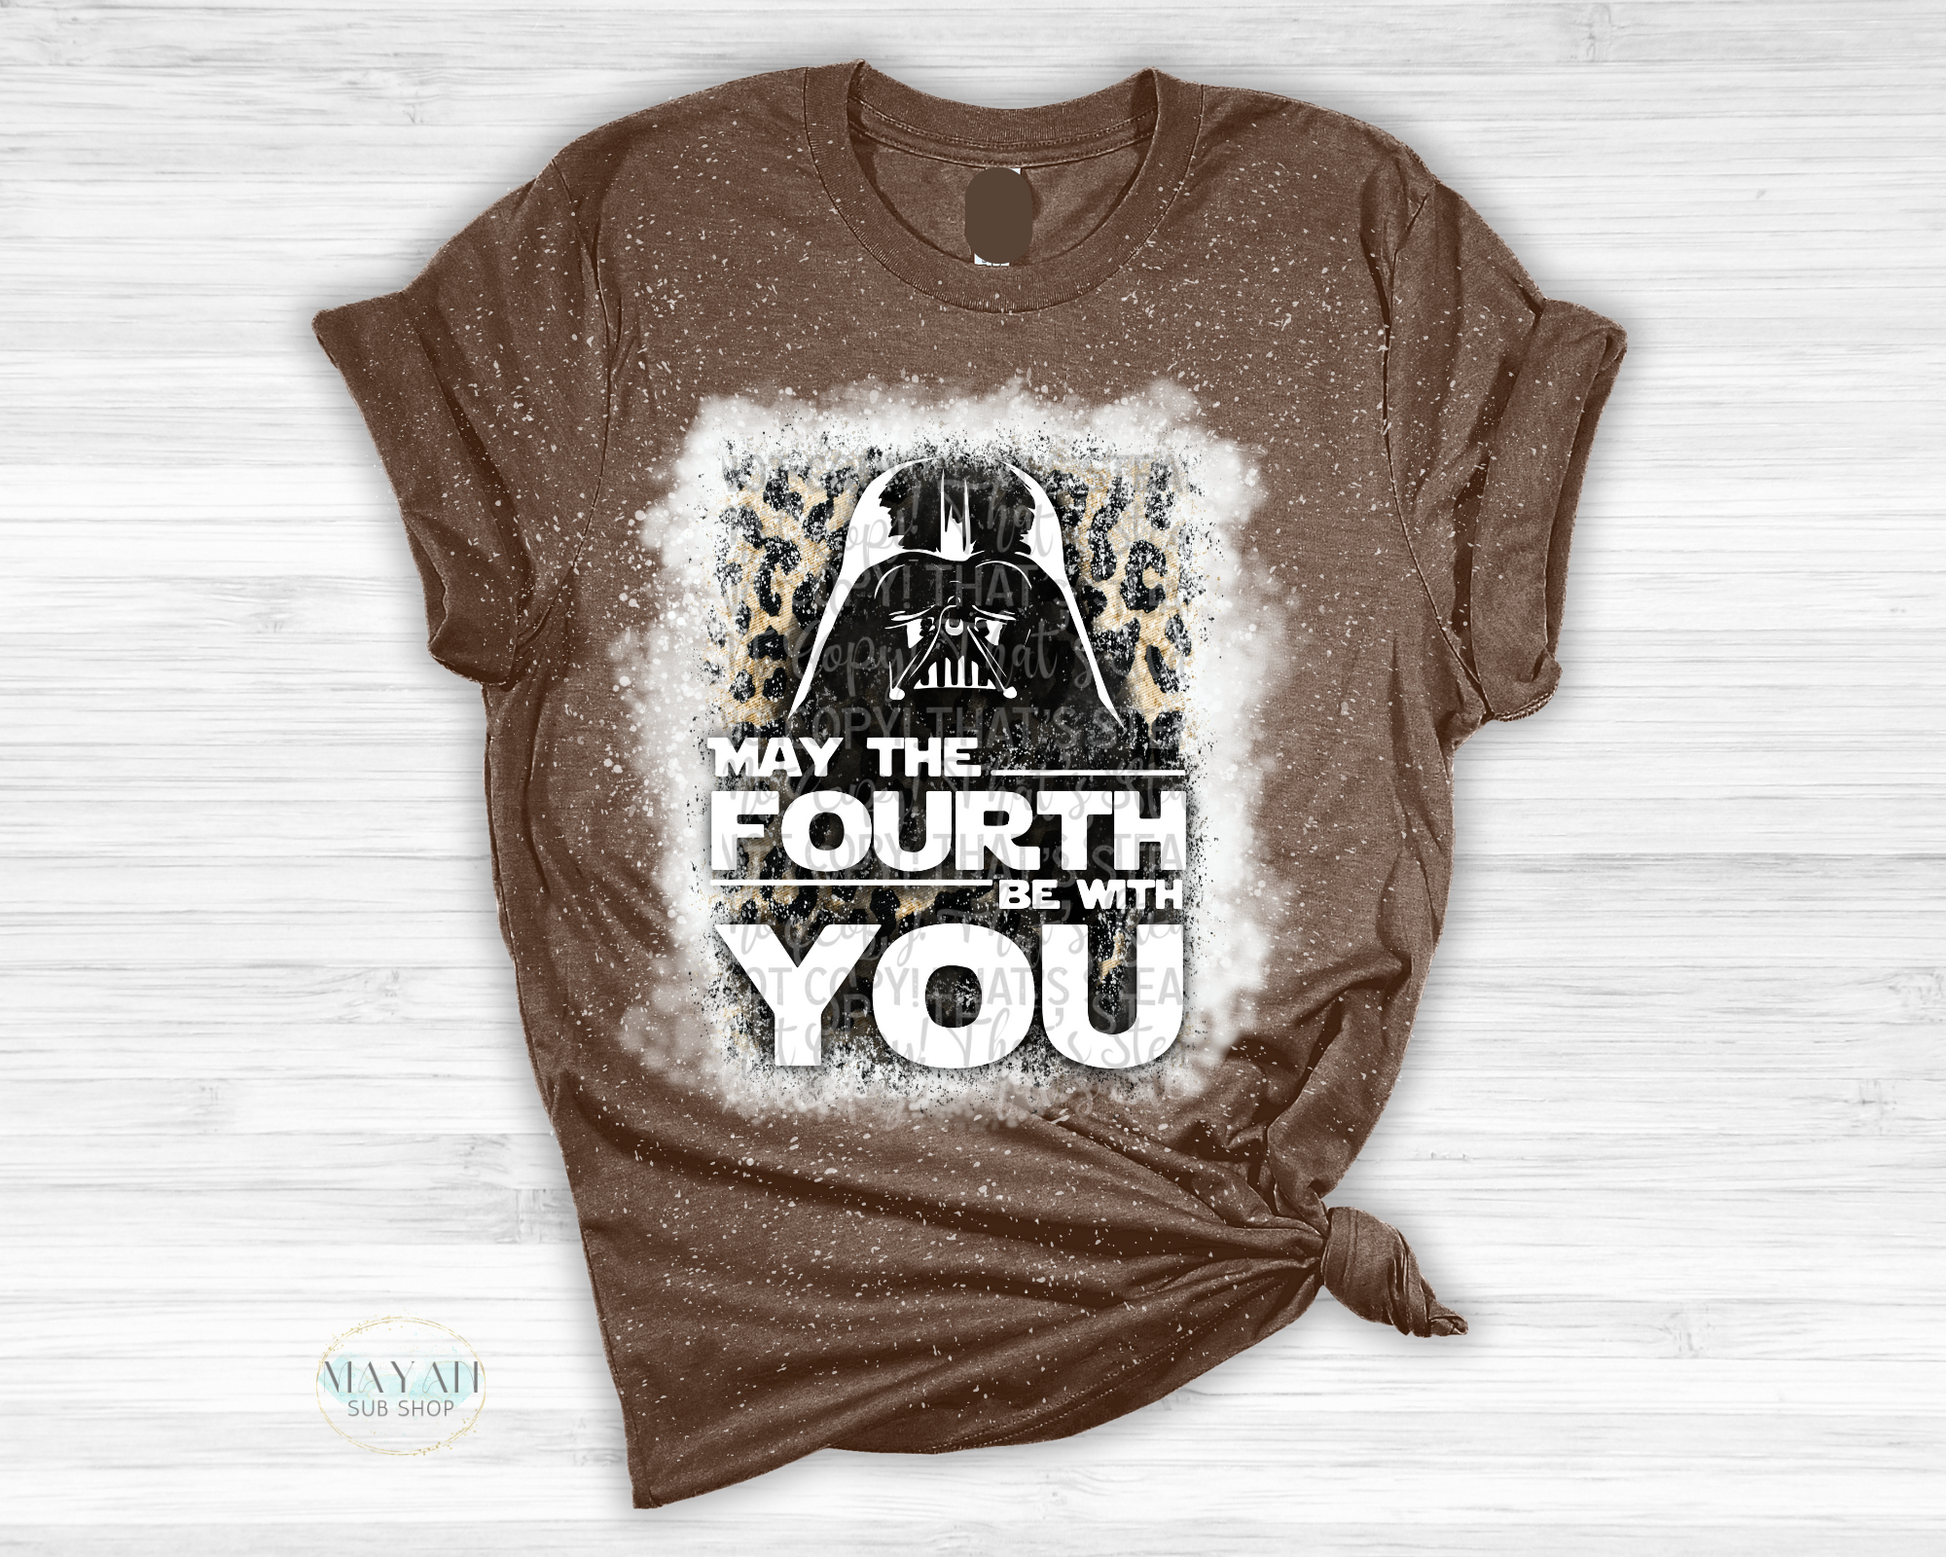 May The Fourth Be With You Bleached Tee - Mayan Sub Shop